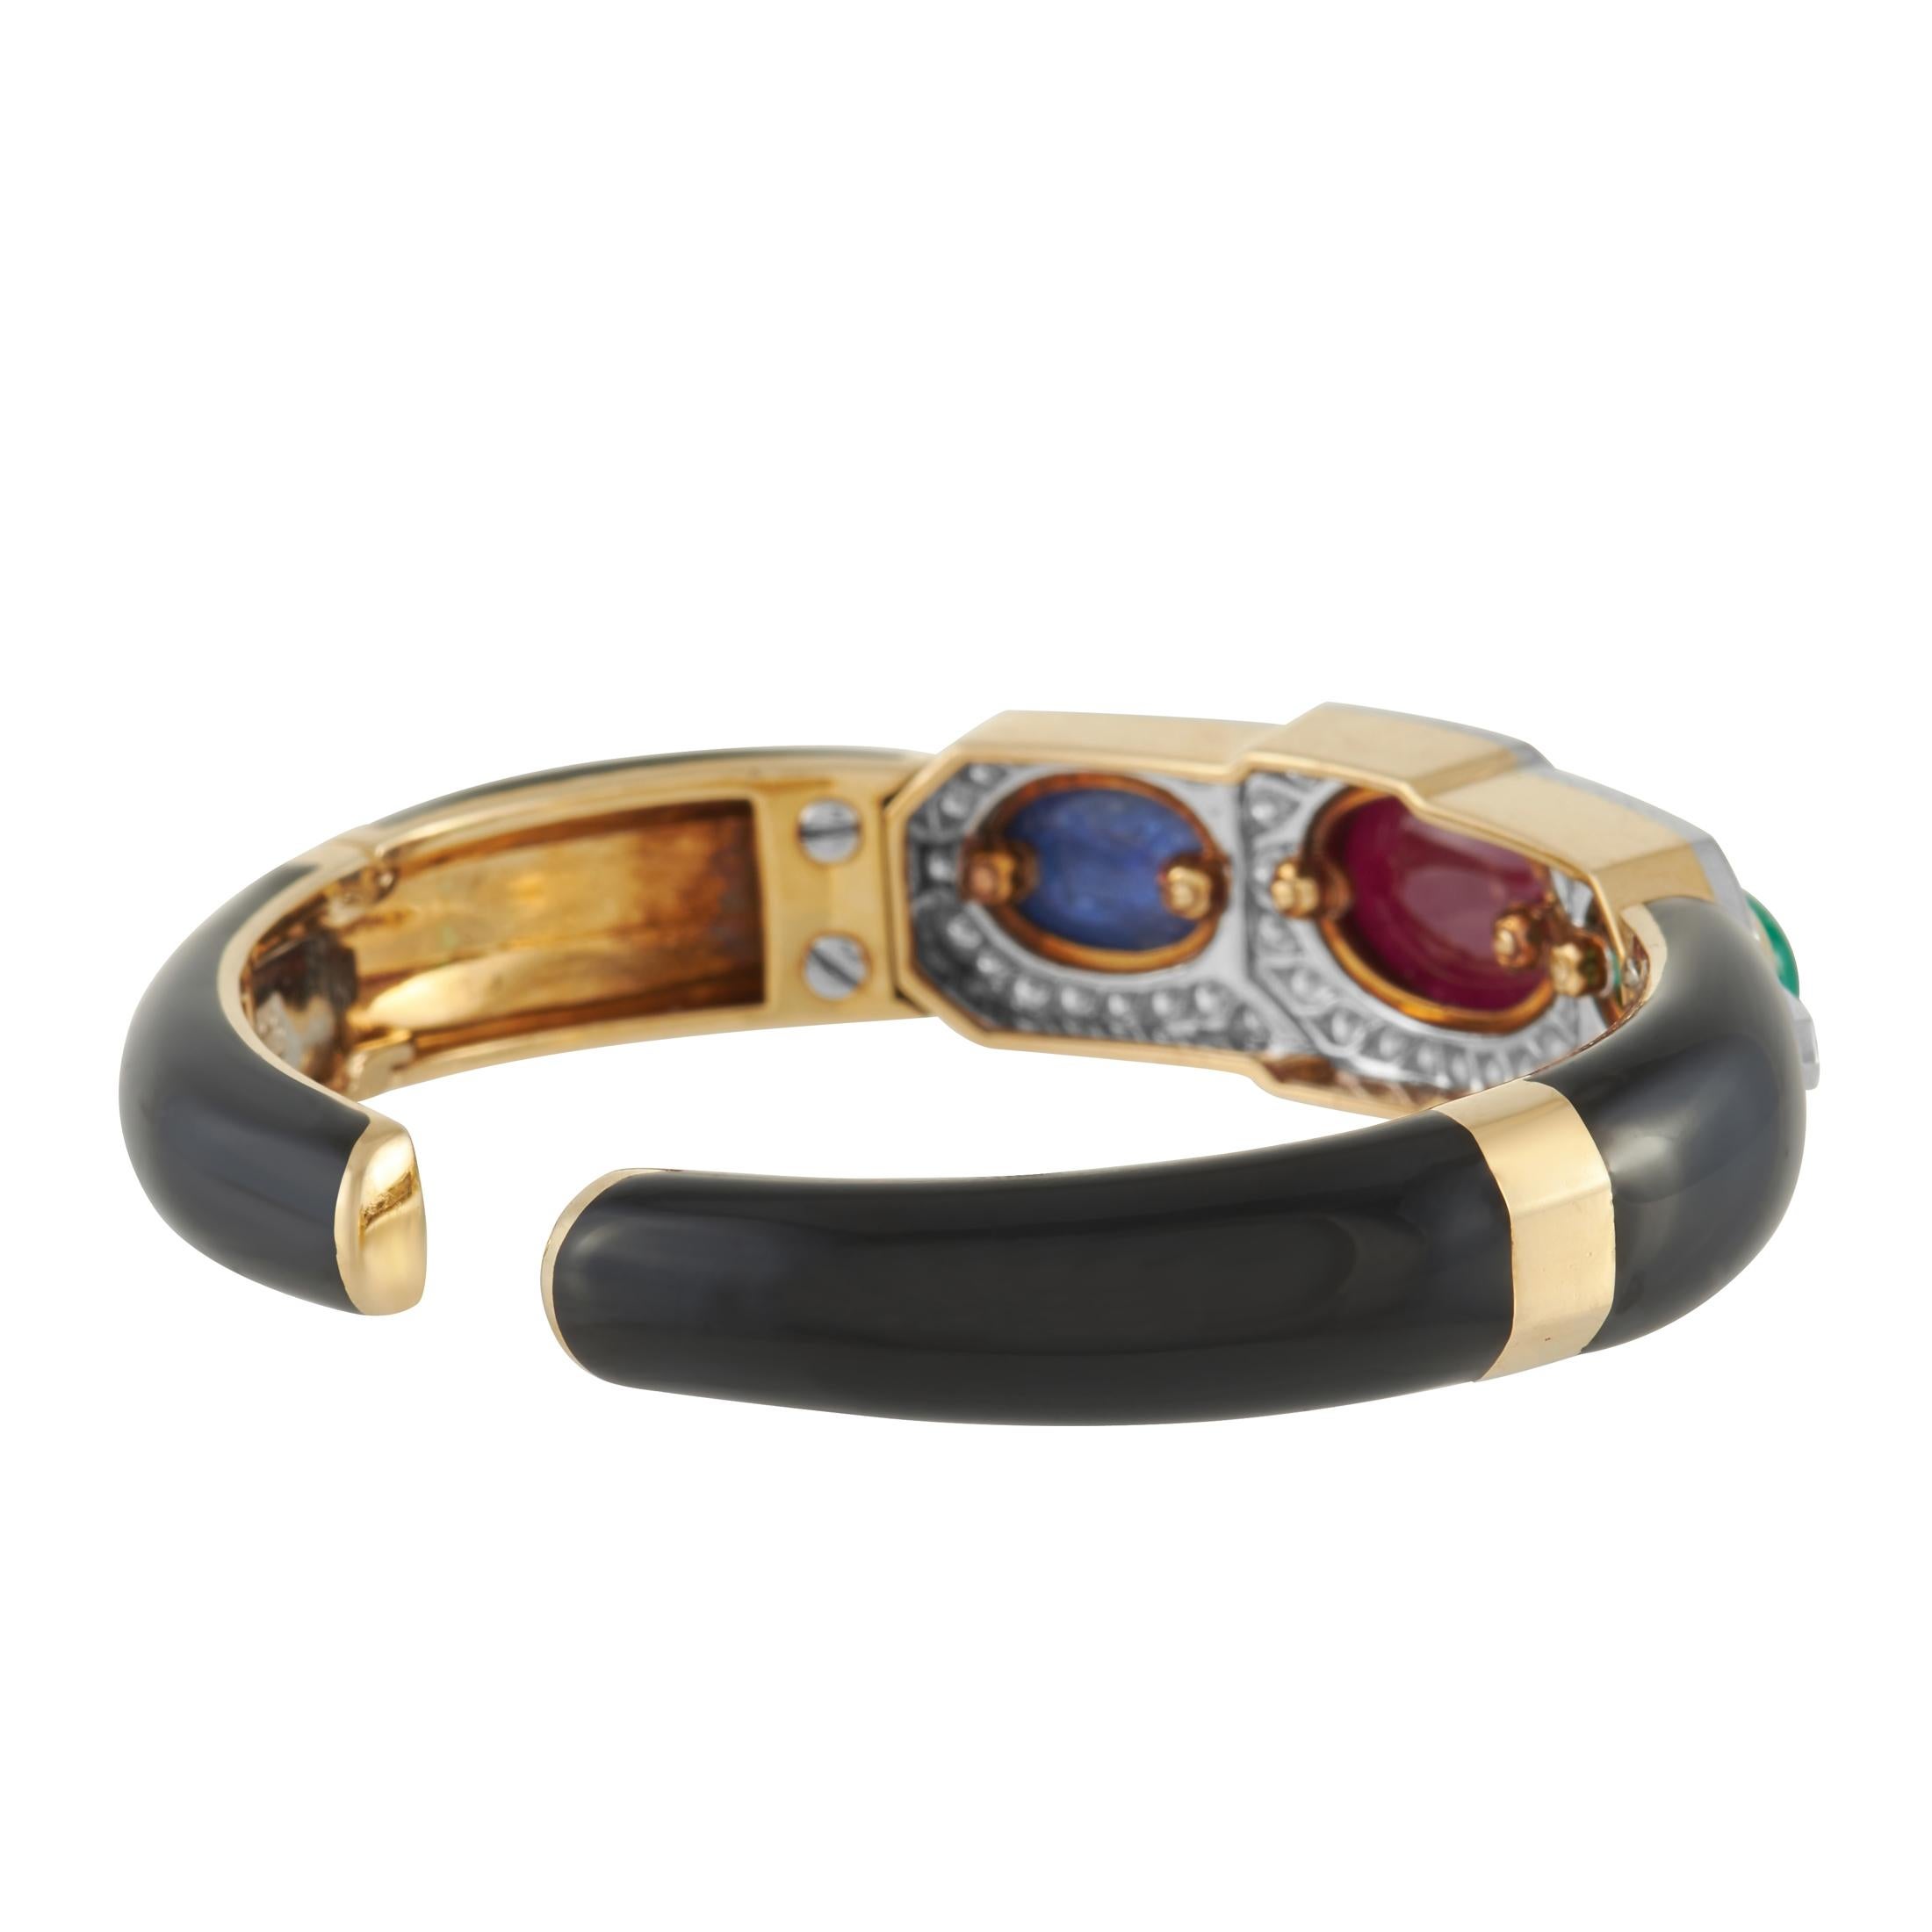 An array of colors make this David Webb bracelet a showpiece that will continually capture your imagination. Black enamel accents this 6.3” bangle-style bracelet, which in anchored by an 18K Yellow Gold base. At the center, you’ll find a trio of